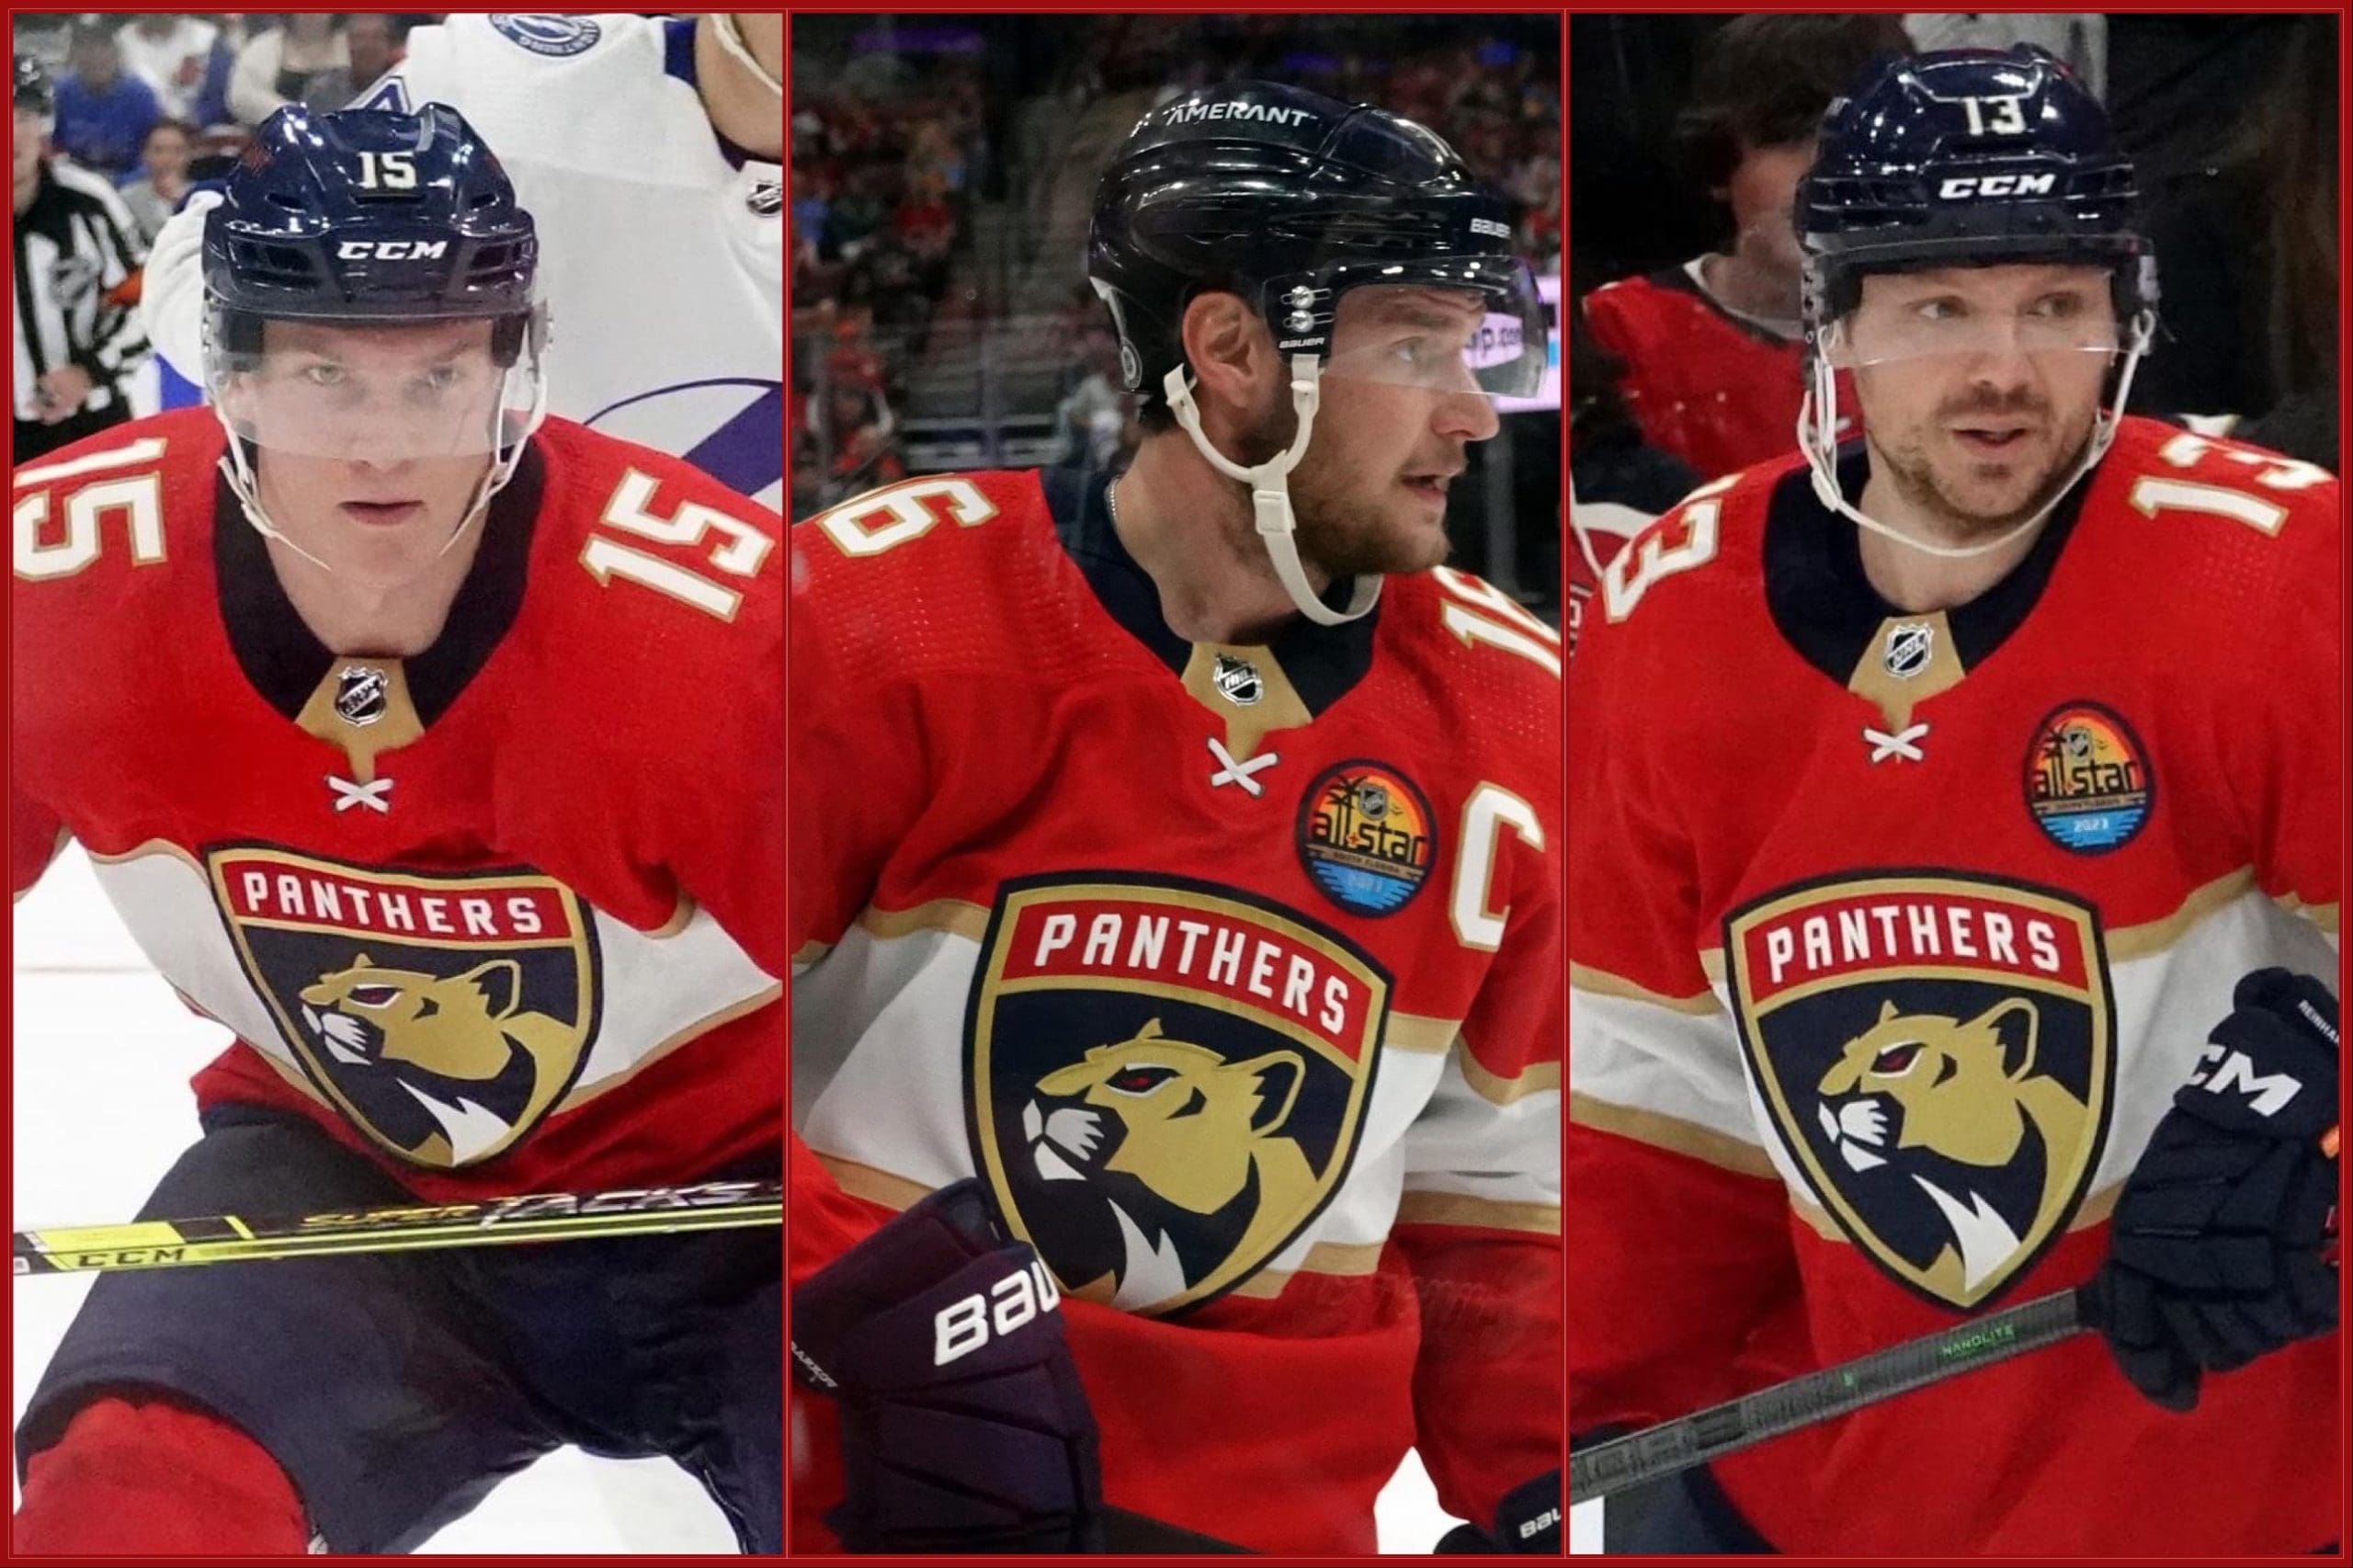 Sneak Peek at Florida Panthers NHL All-Star Jerseys, Events?